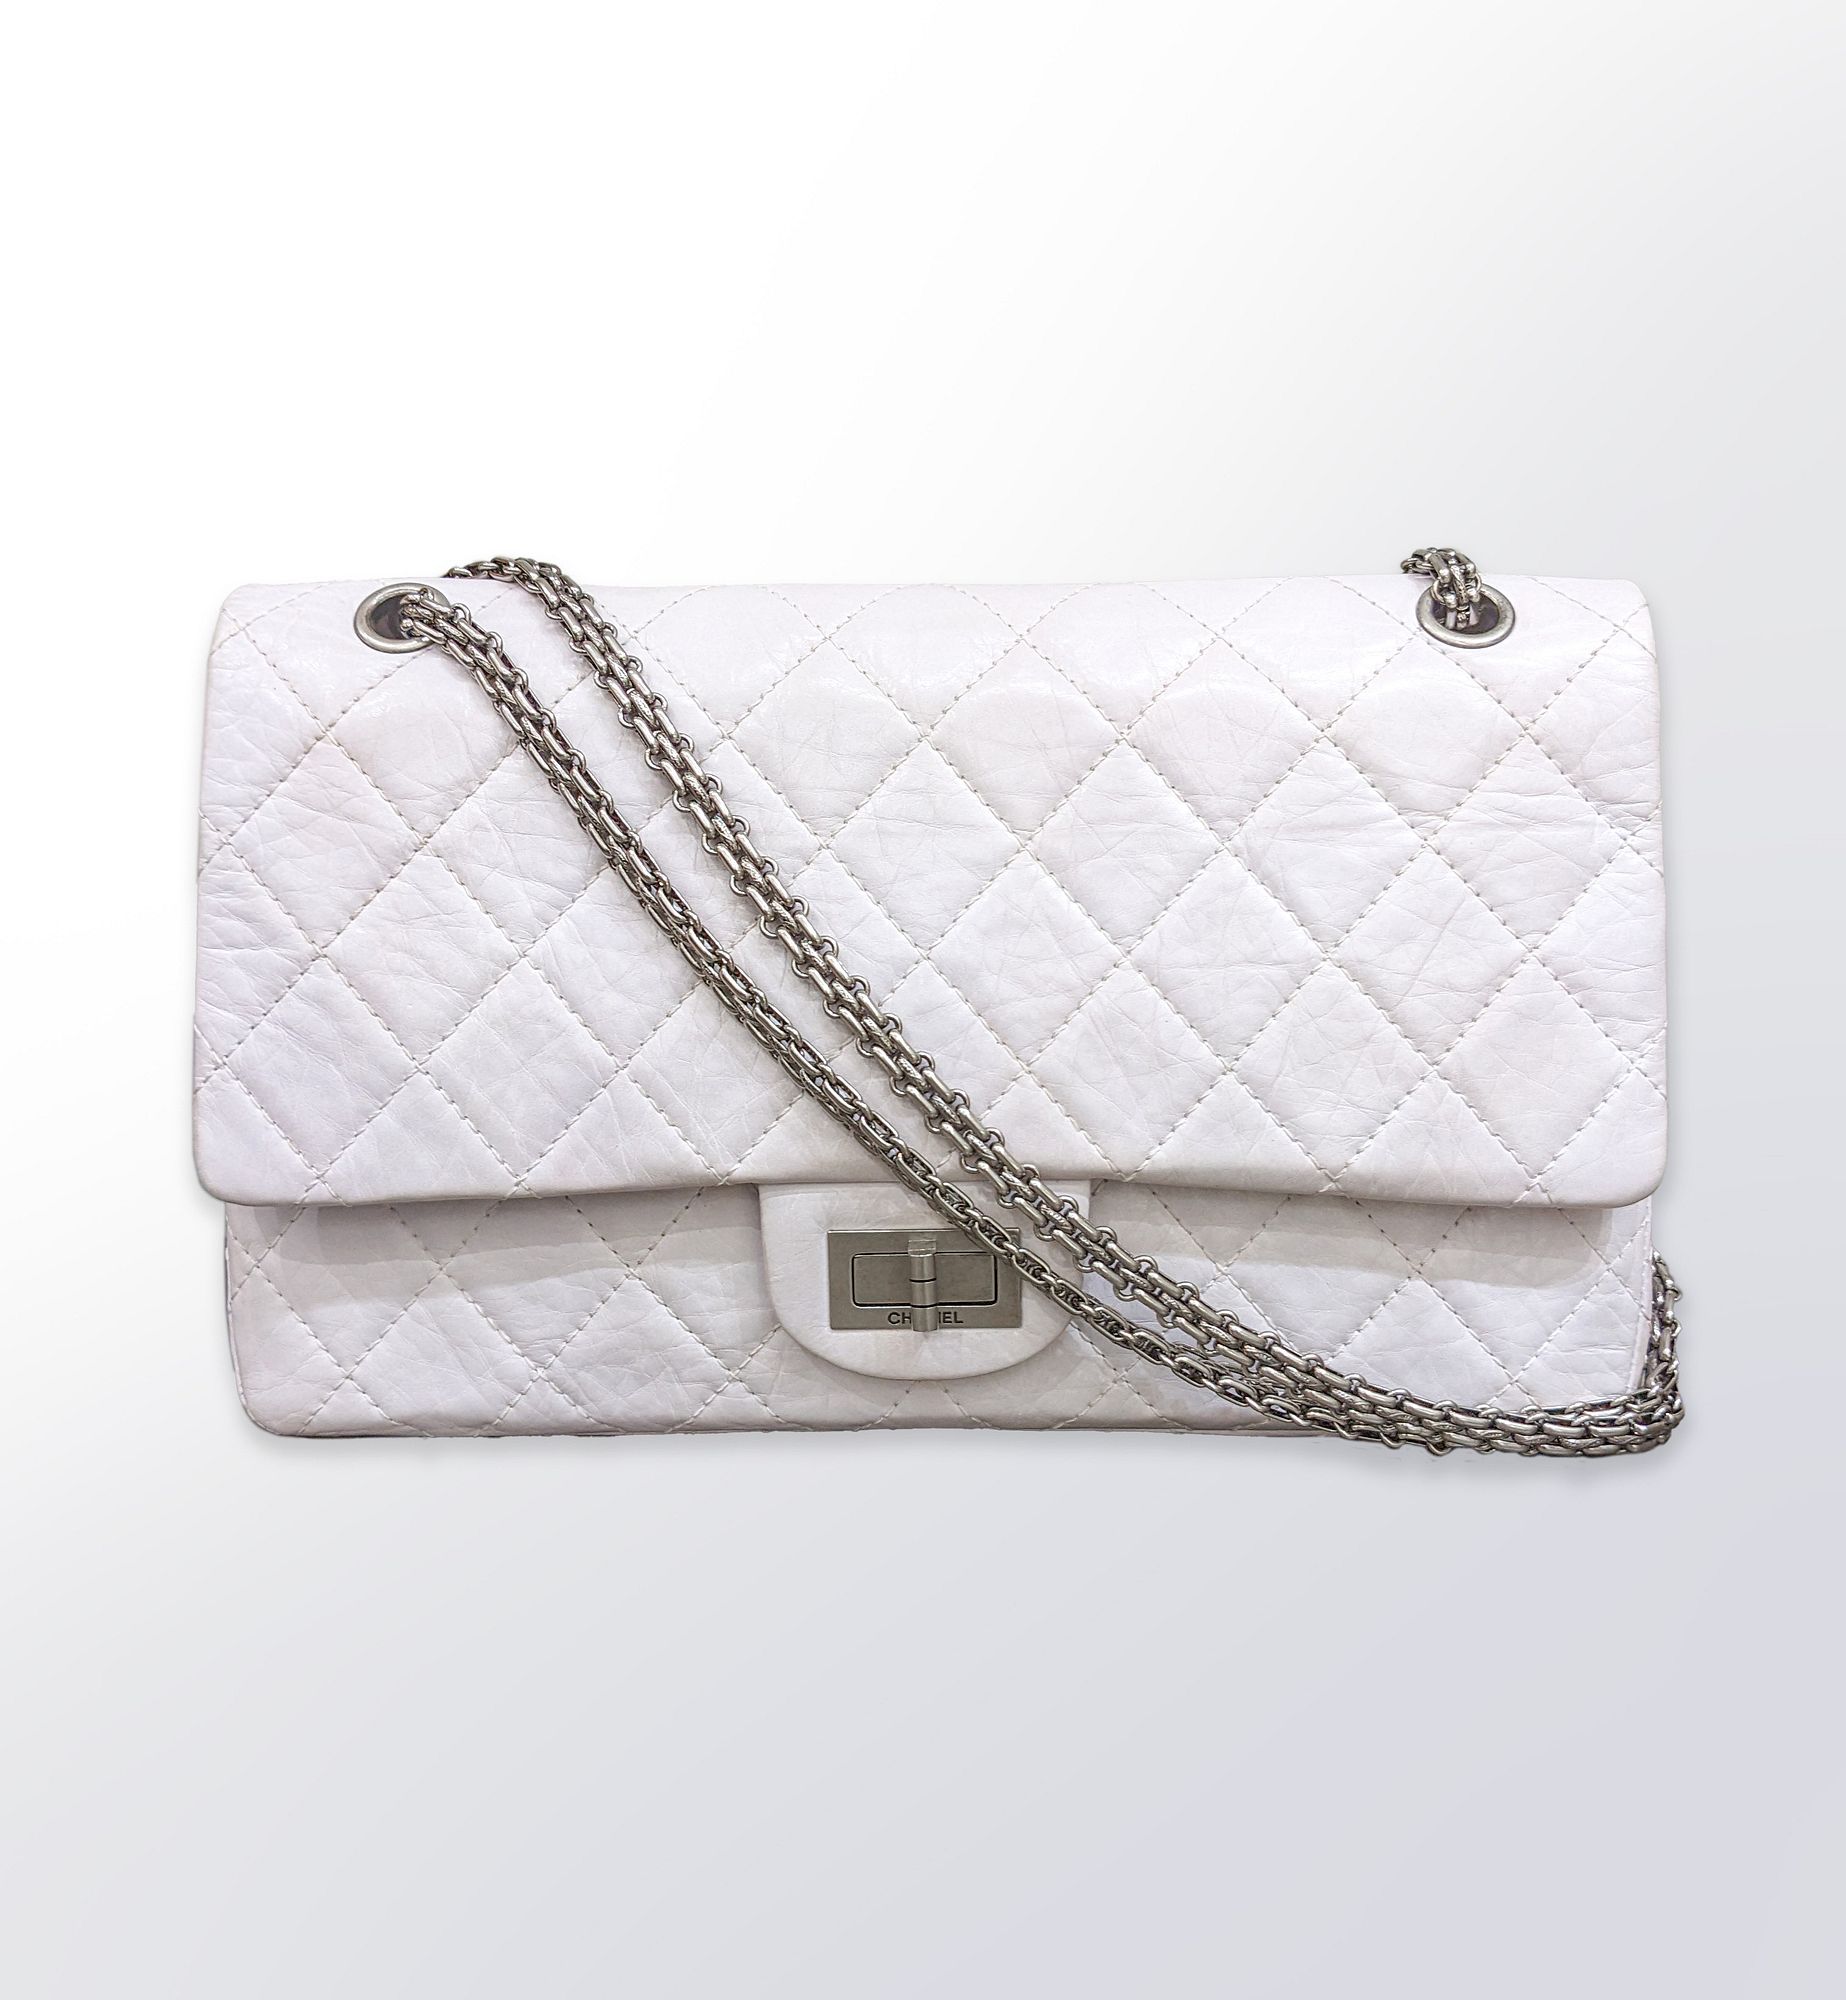 Chanel Reissue 2.55 Small Classic 225 Limited Edition 50th